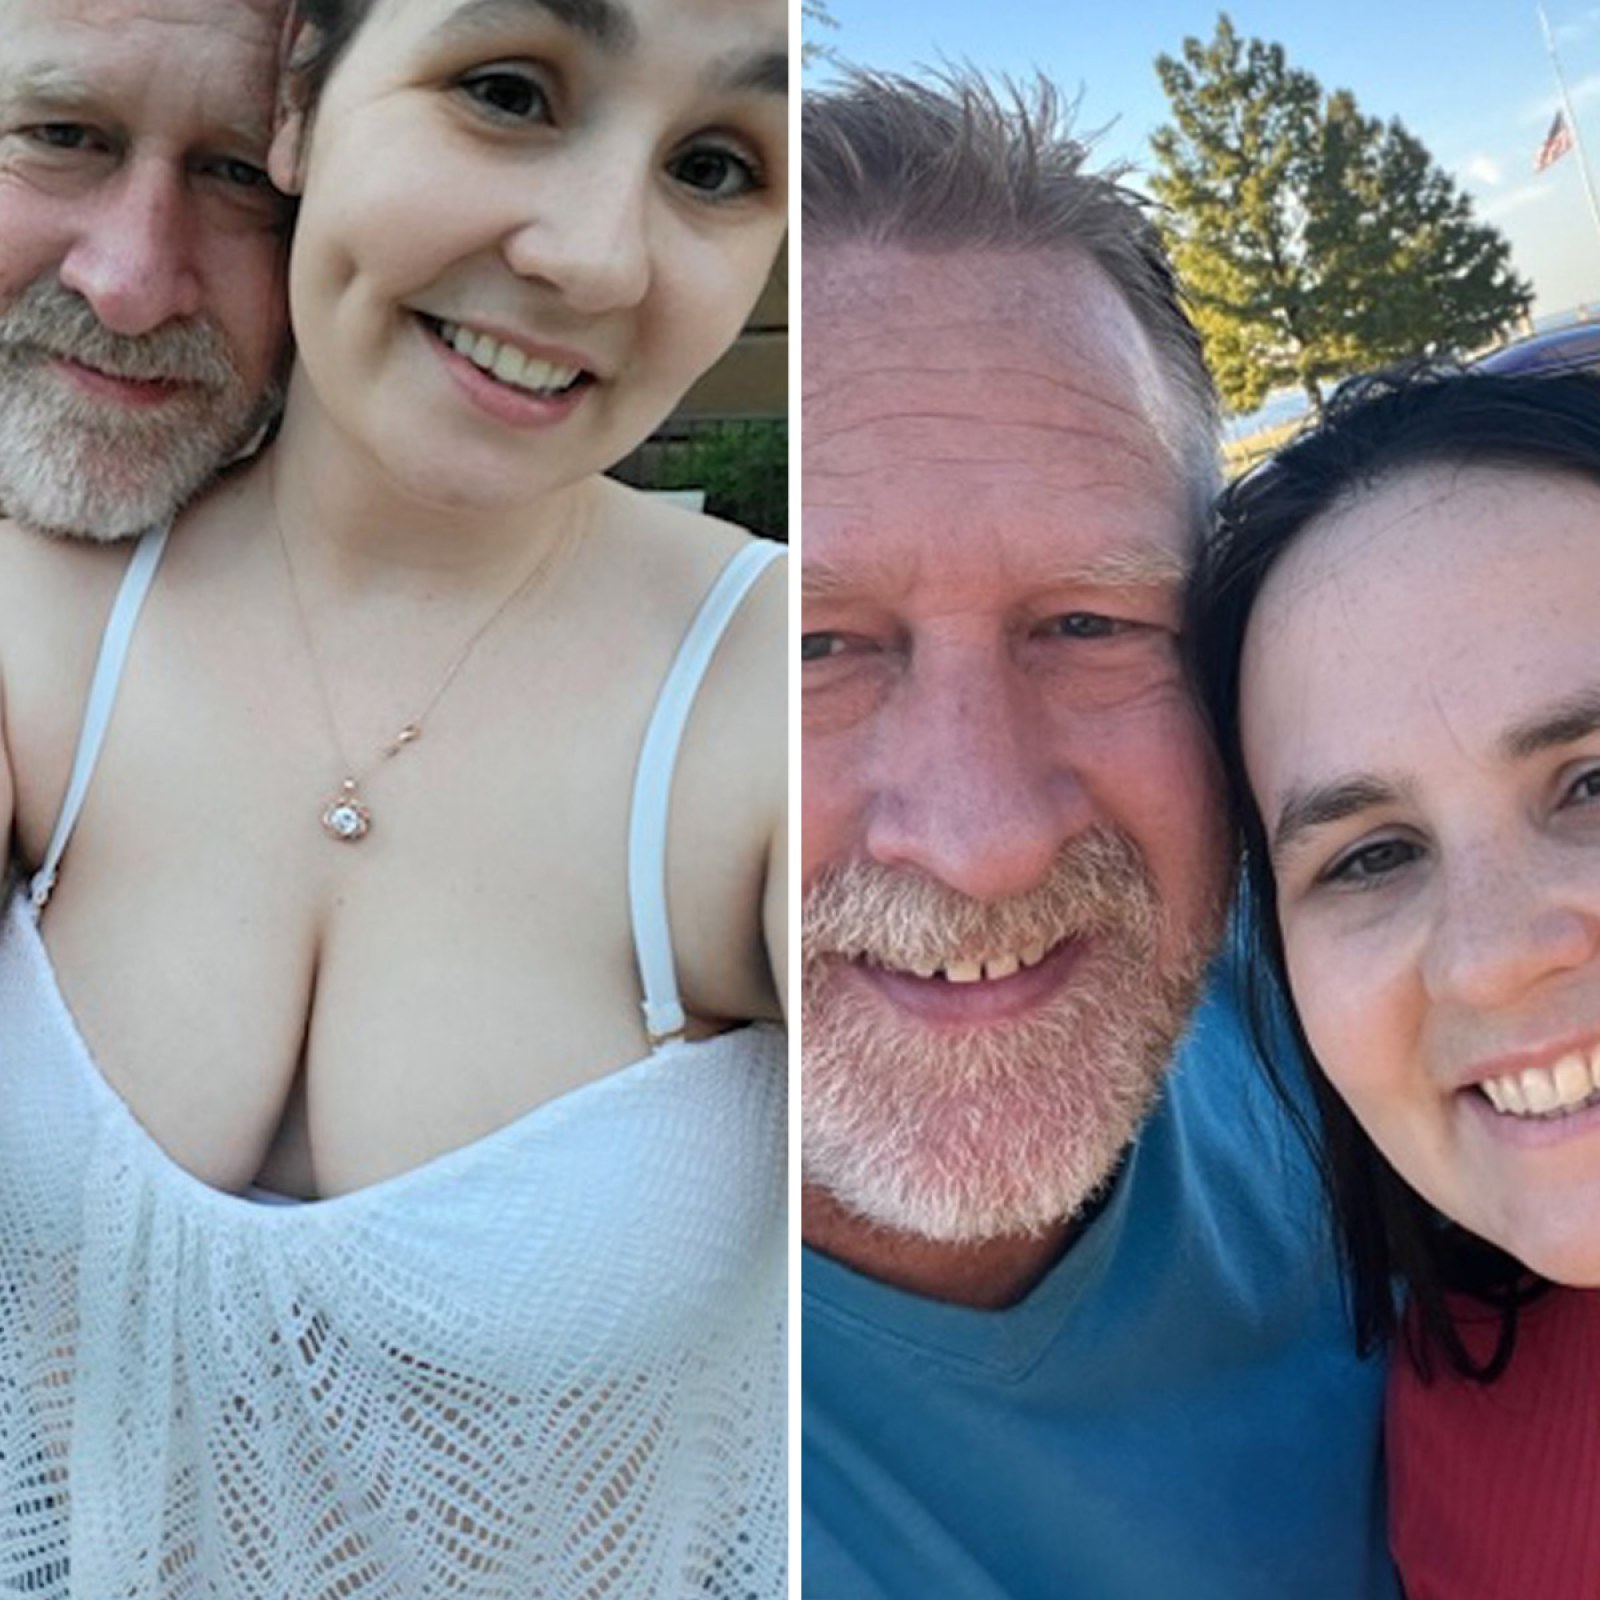 He's My Fiancé, Not My Dad': Woman Defends 21-Year Age Gap